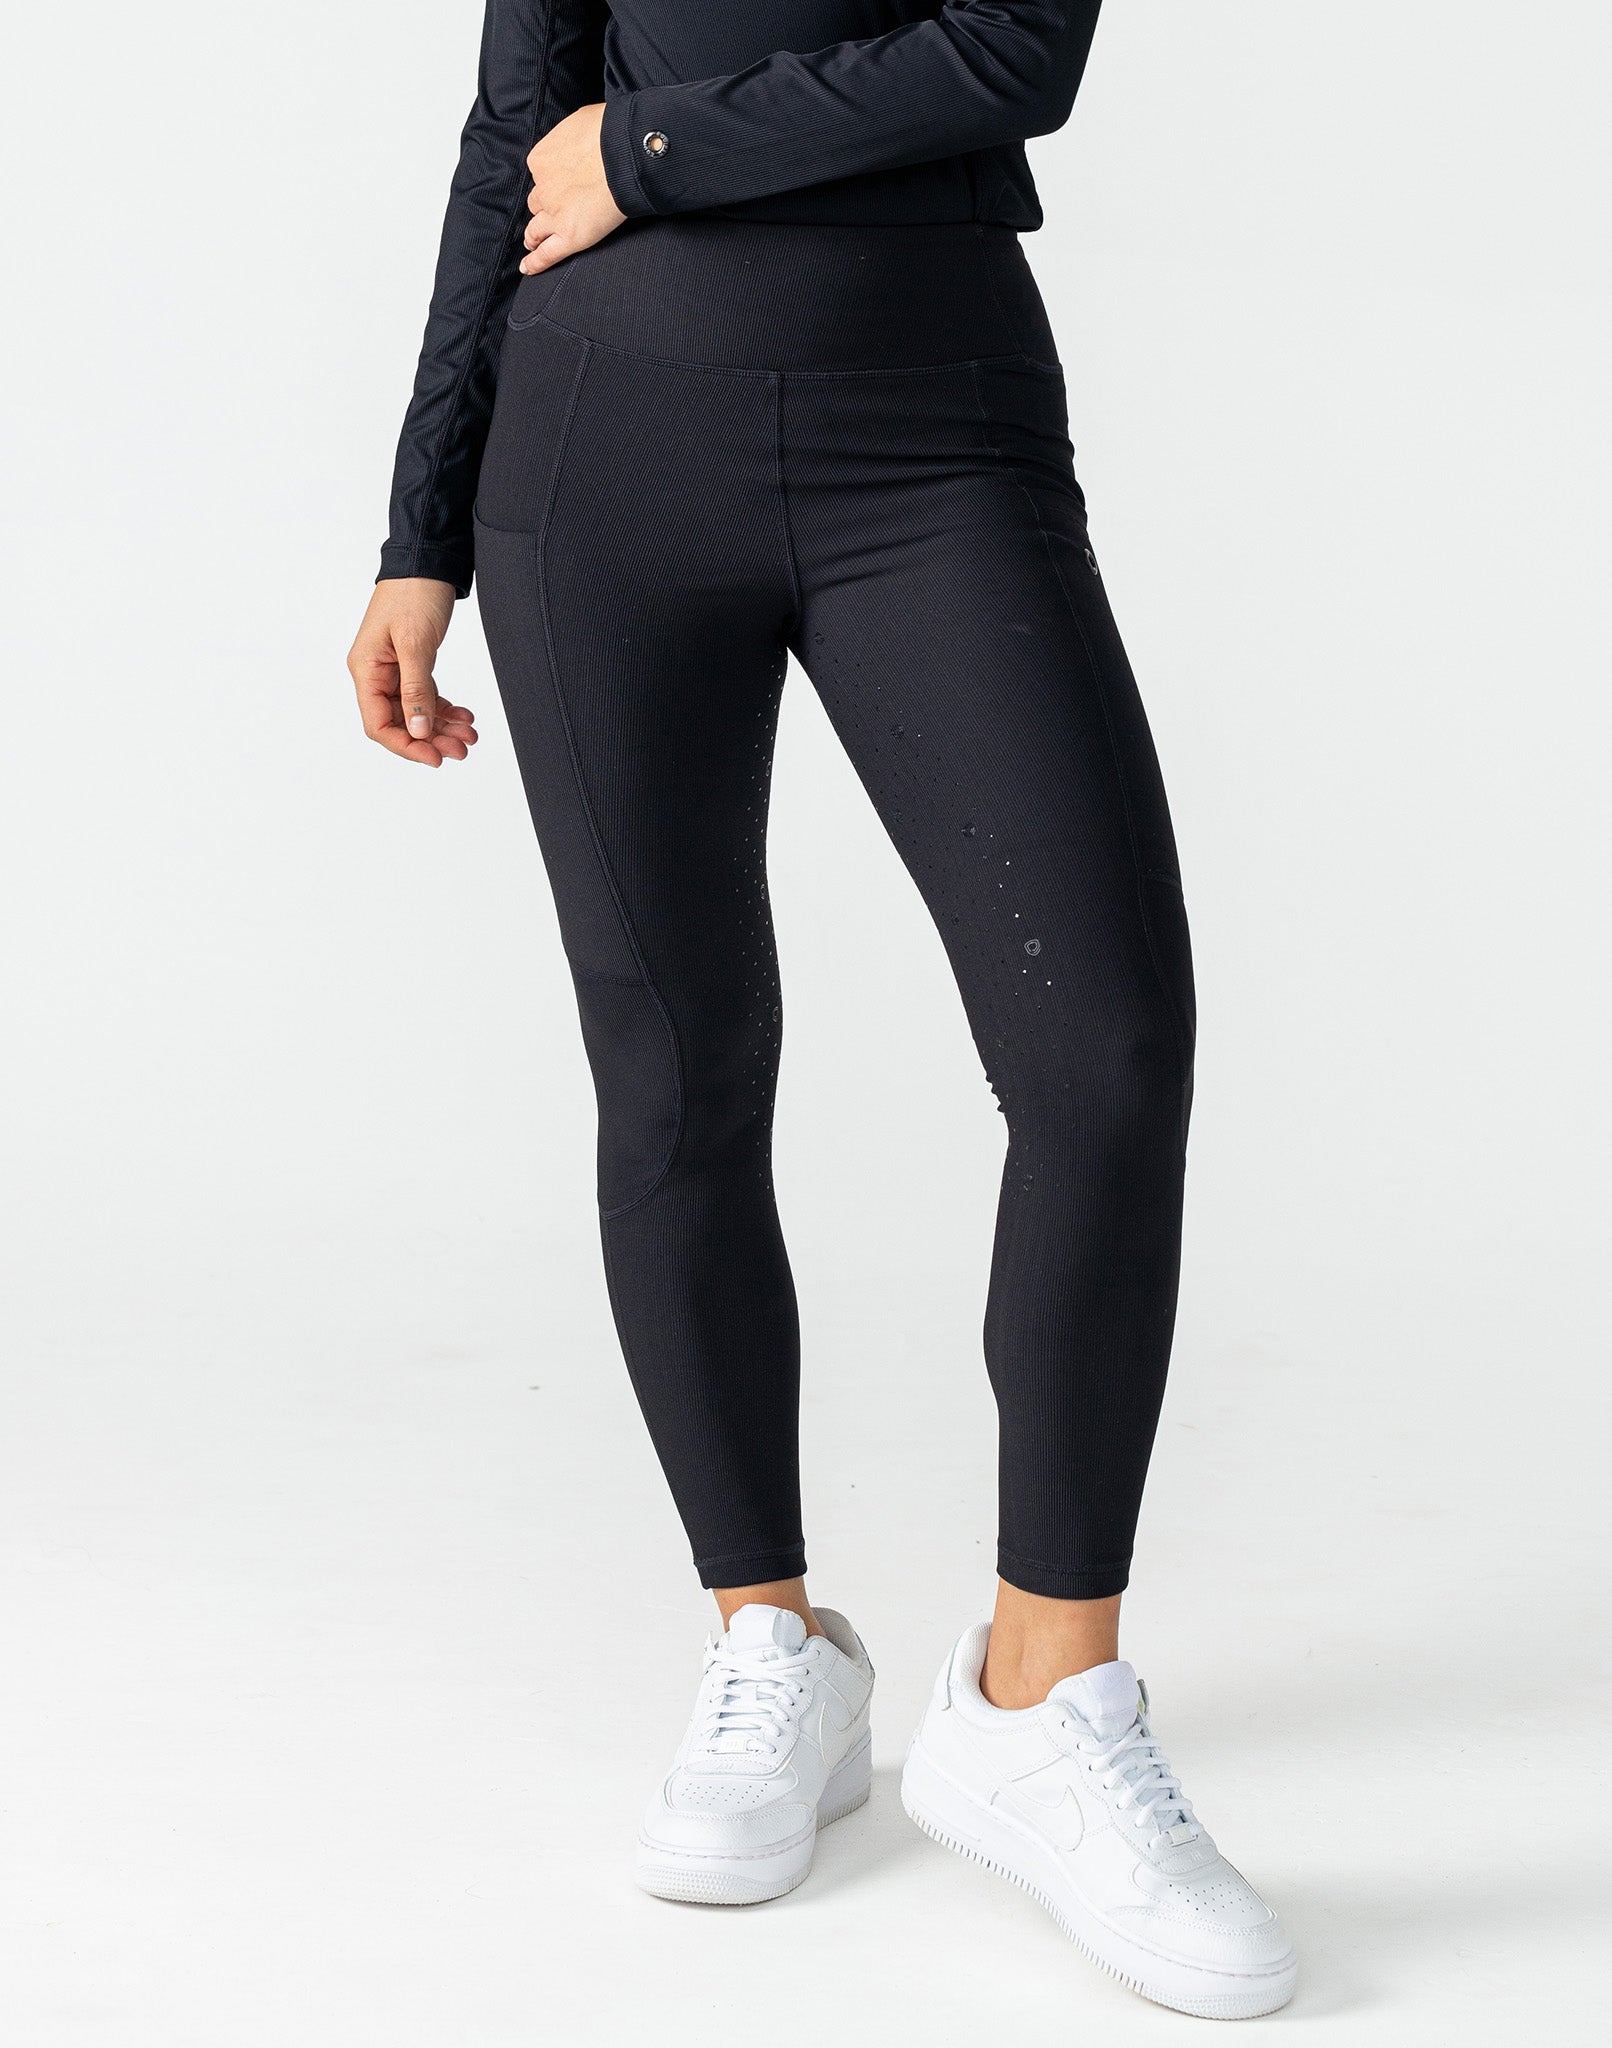 blankclothing.com.au - What is a TREGGING? Treggings are leggings